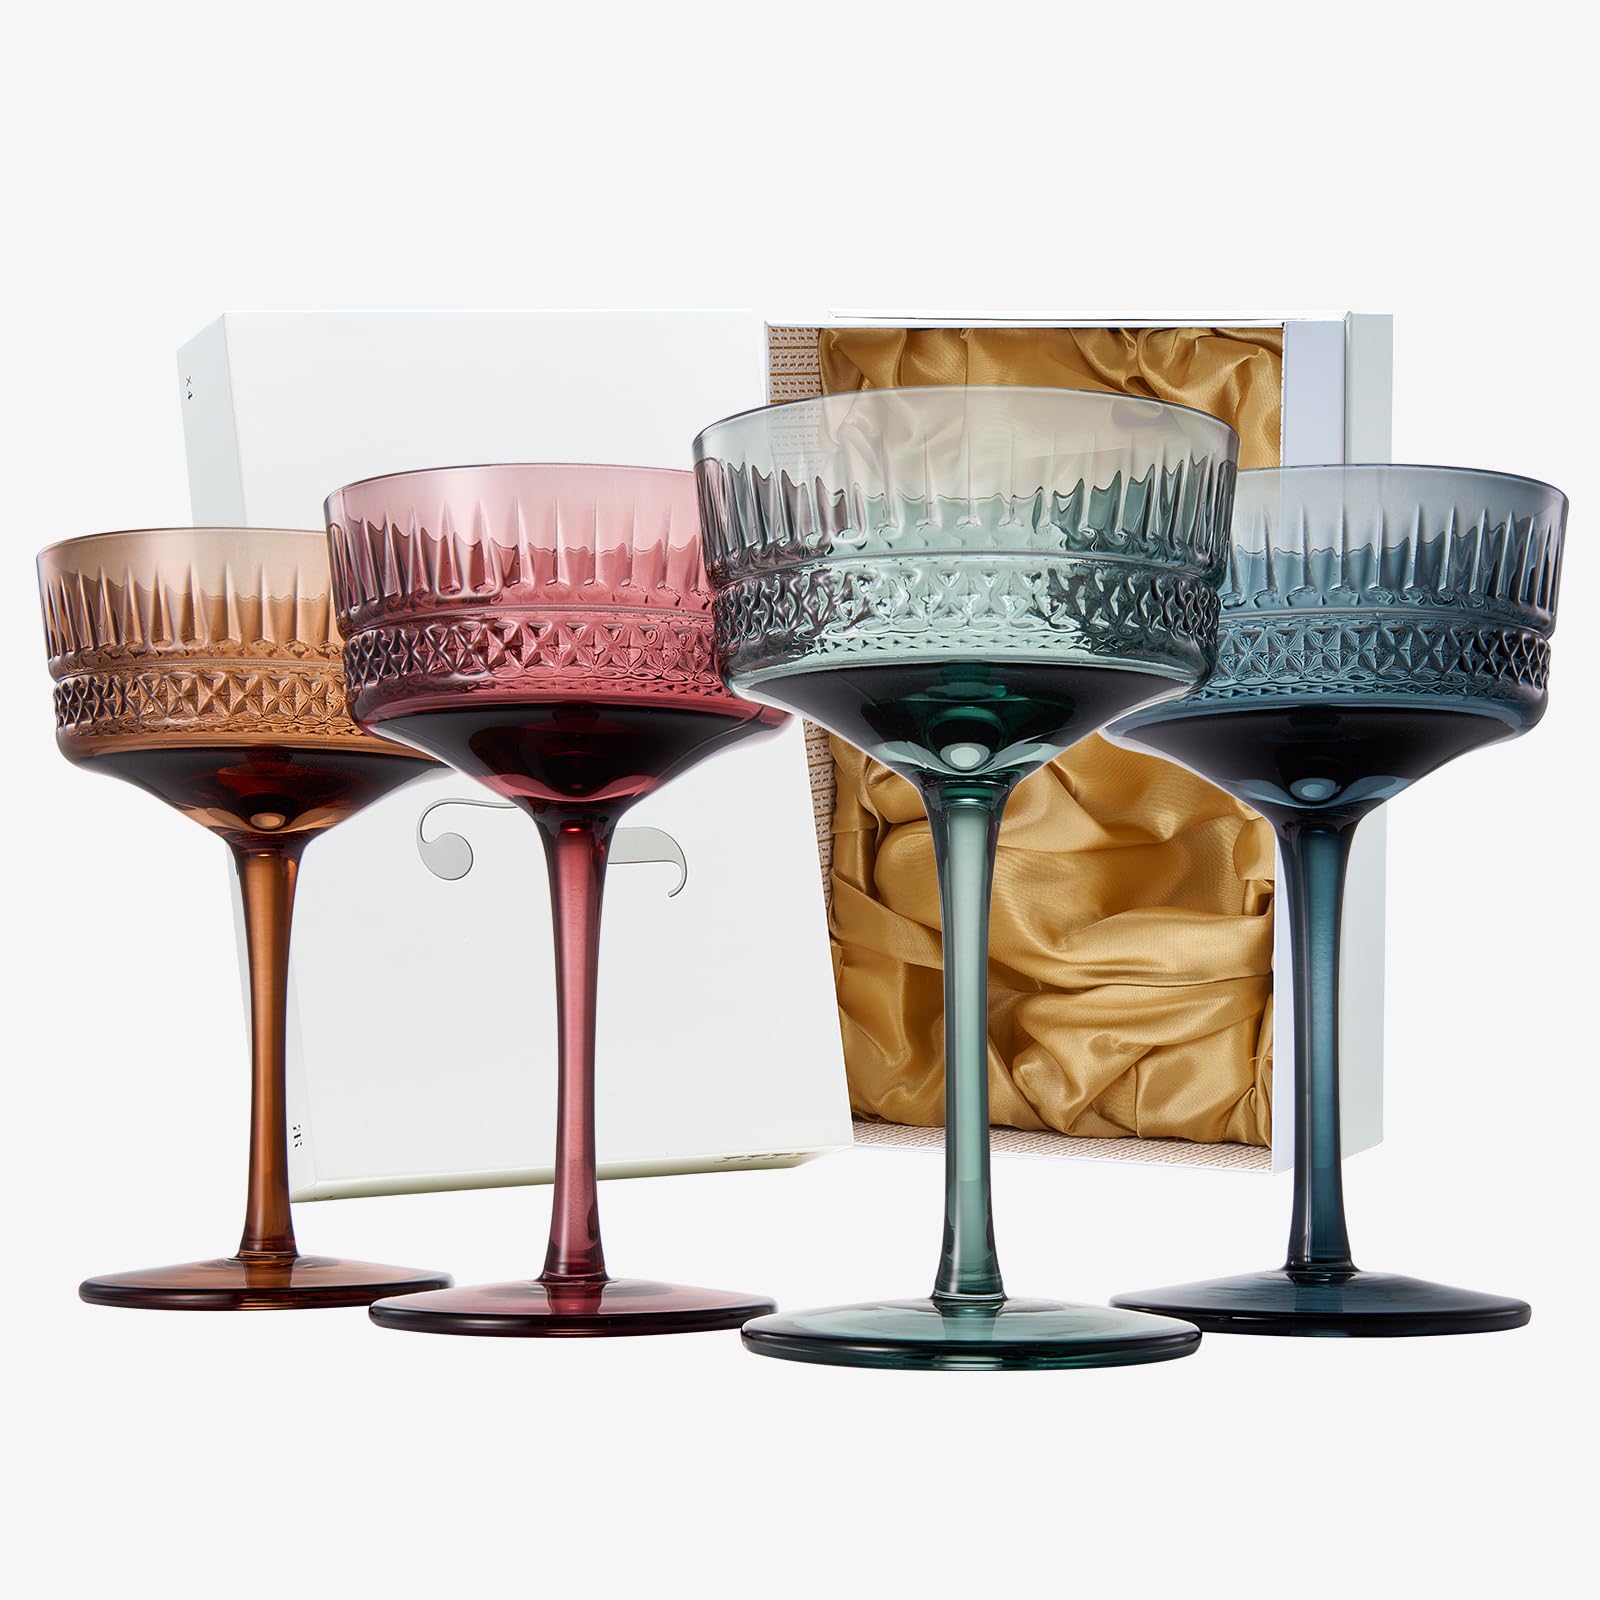 Art Deco Colored Crystal Coupe Glass | Set of 4 | Large 9.6oz Stemmed Glassware Muted Vintage Glasses for Champagne, Cocktail, Margarita, Wine Glass, Gift Idea, Pastel Unique Speakeasy Style Goblet